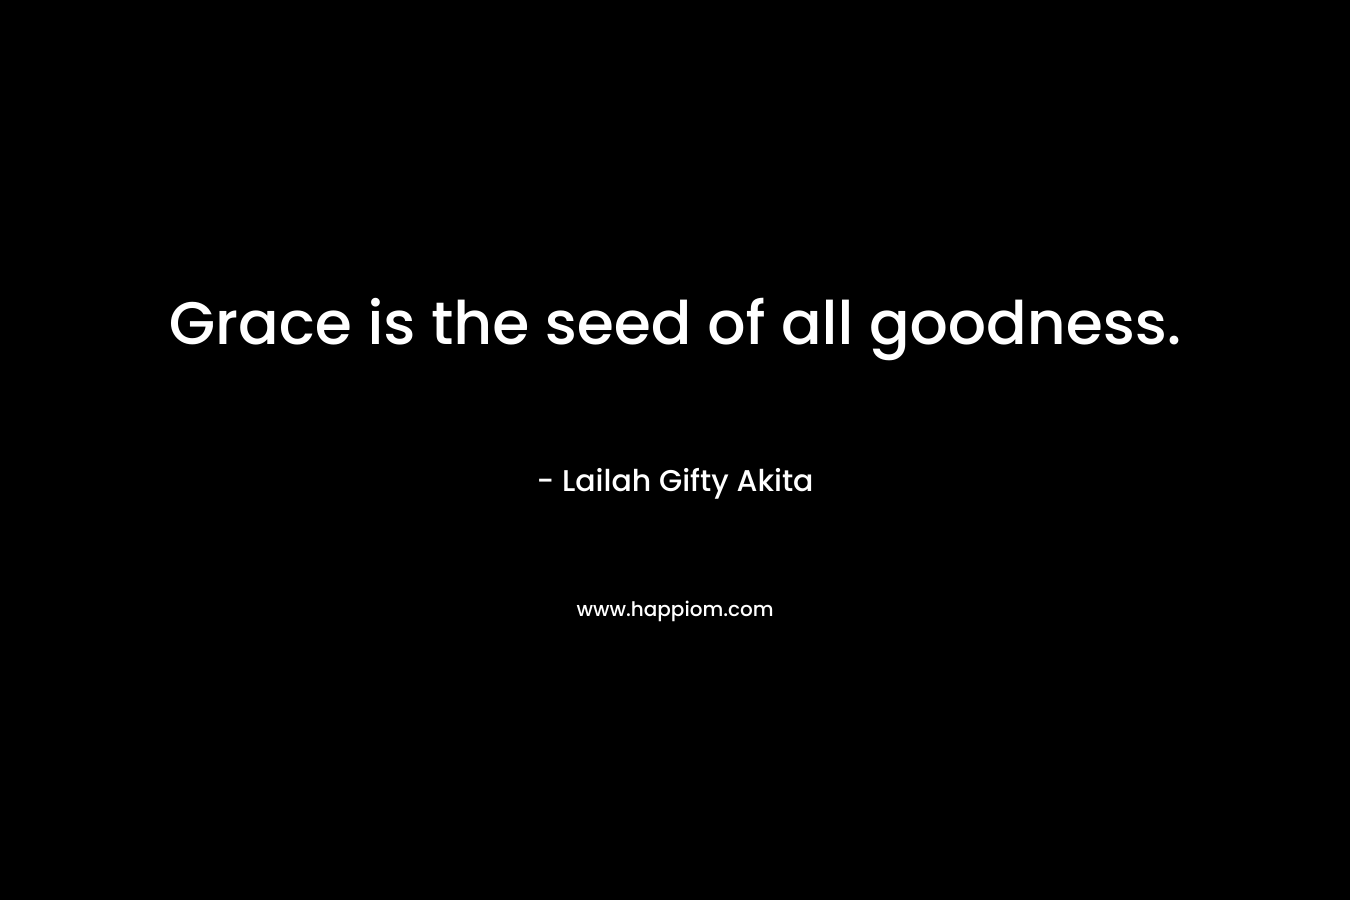 Grace is the seed of all goodness.